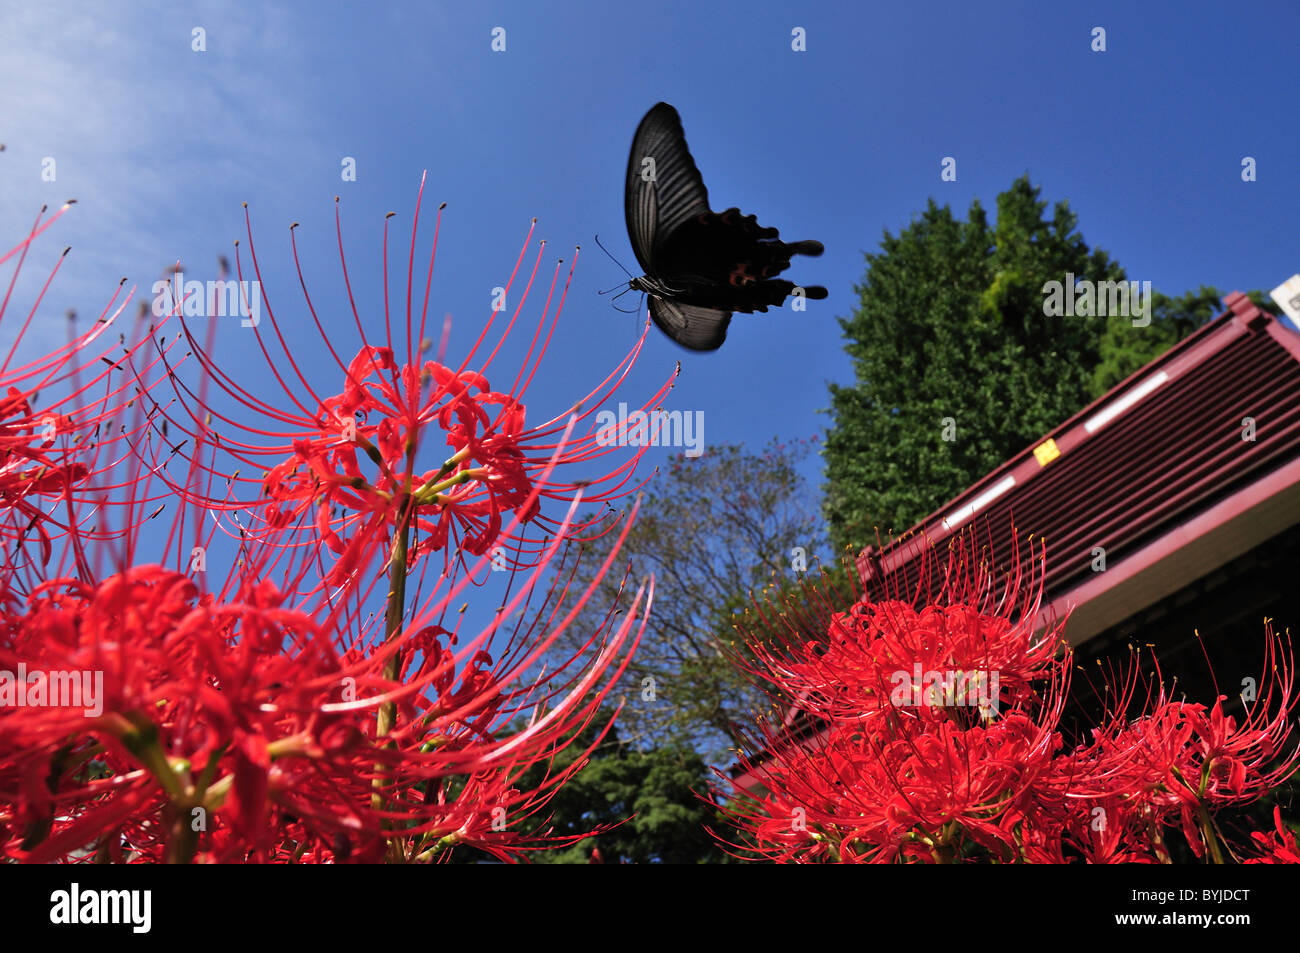 Spangle Butterfly Flying Over Amaryllis Flowers Stock Photo